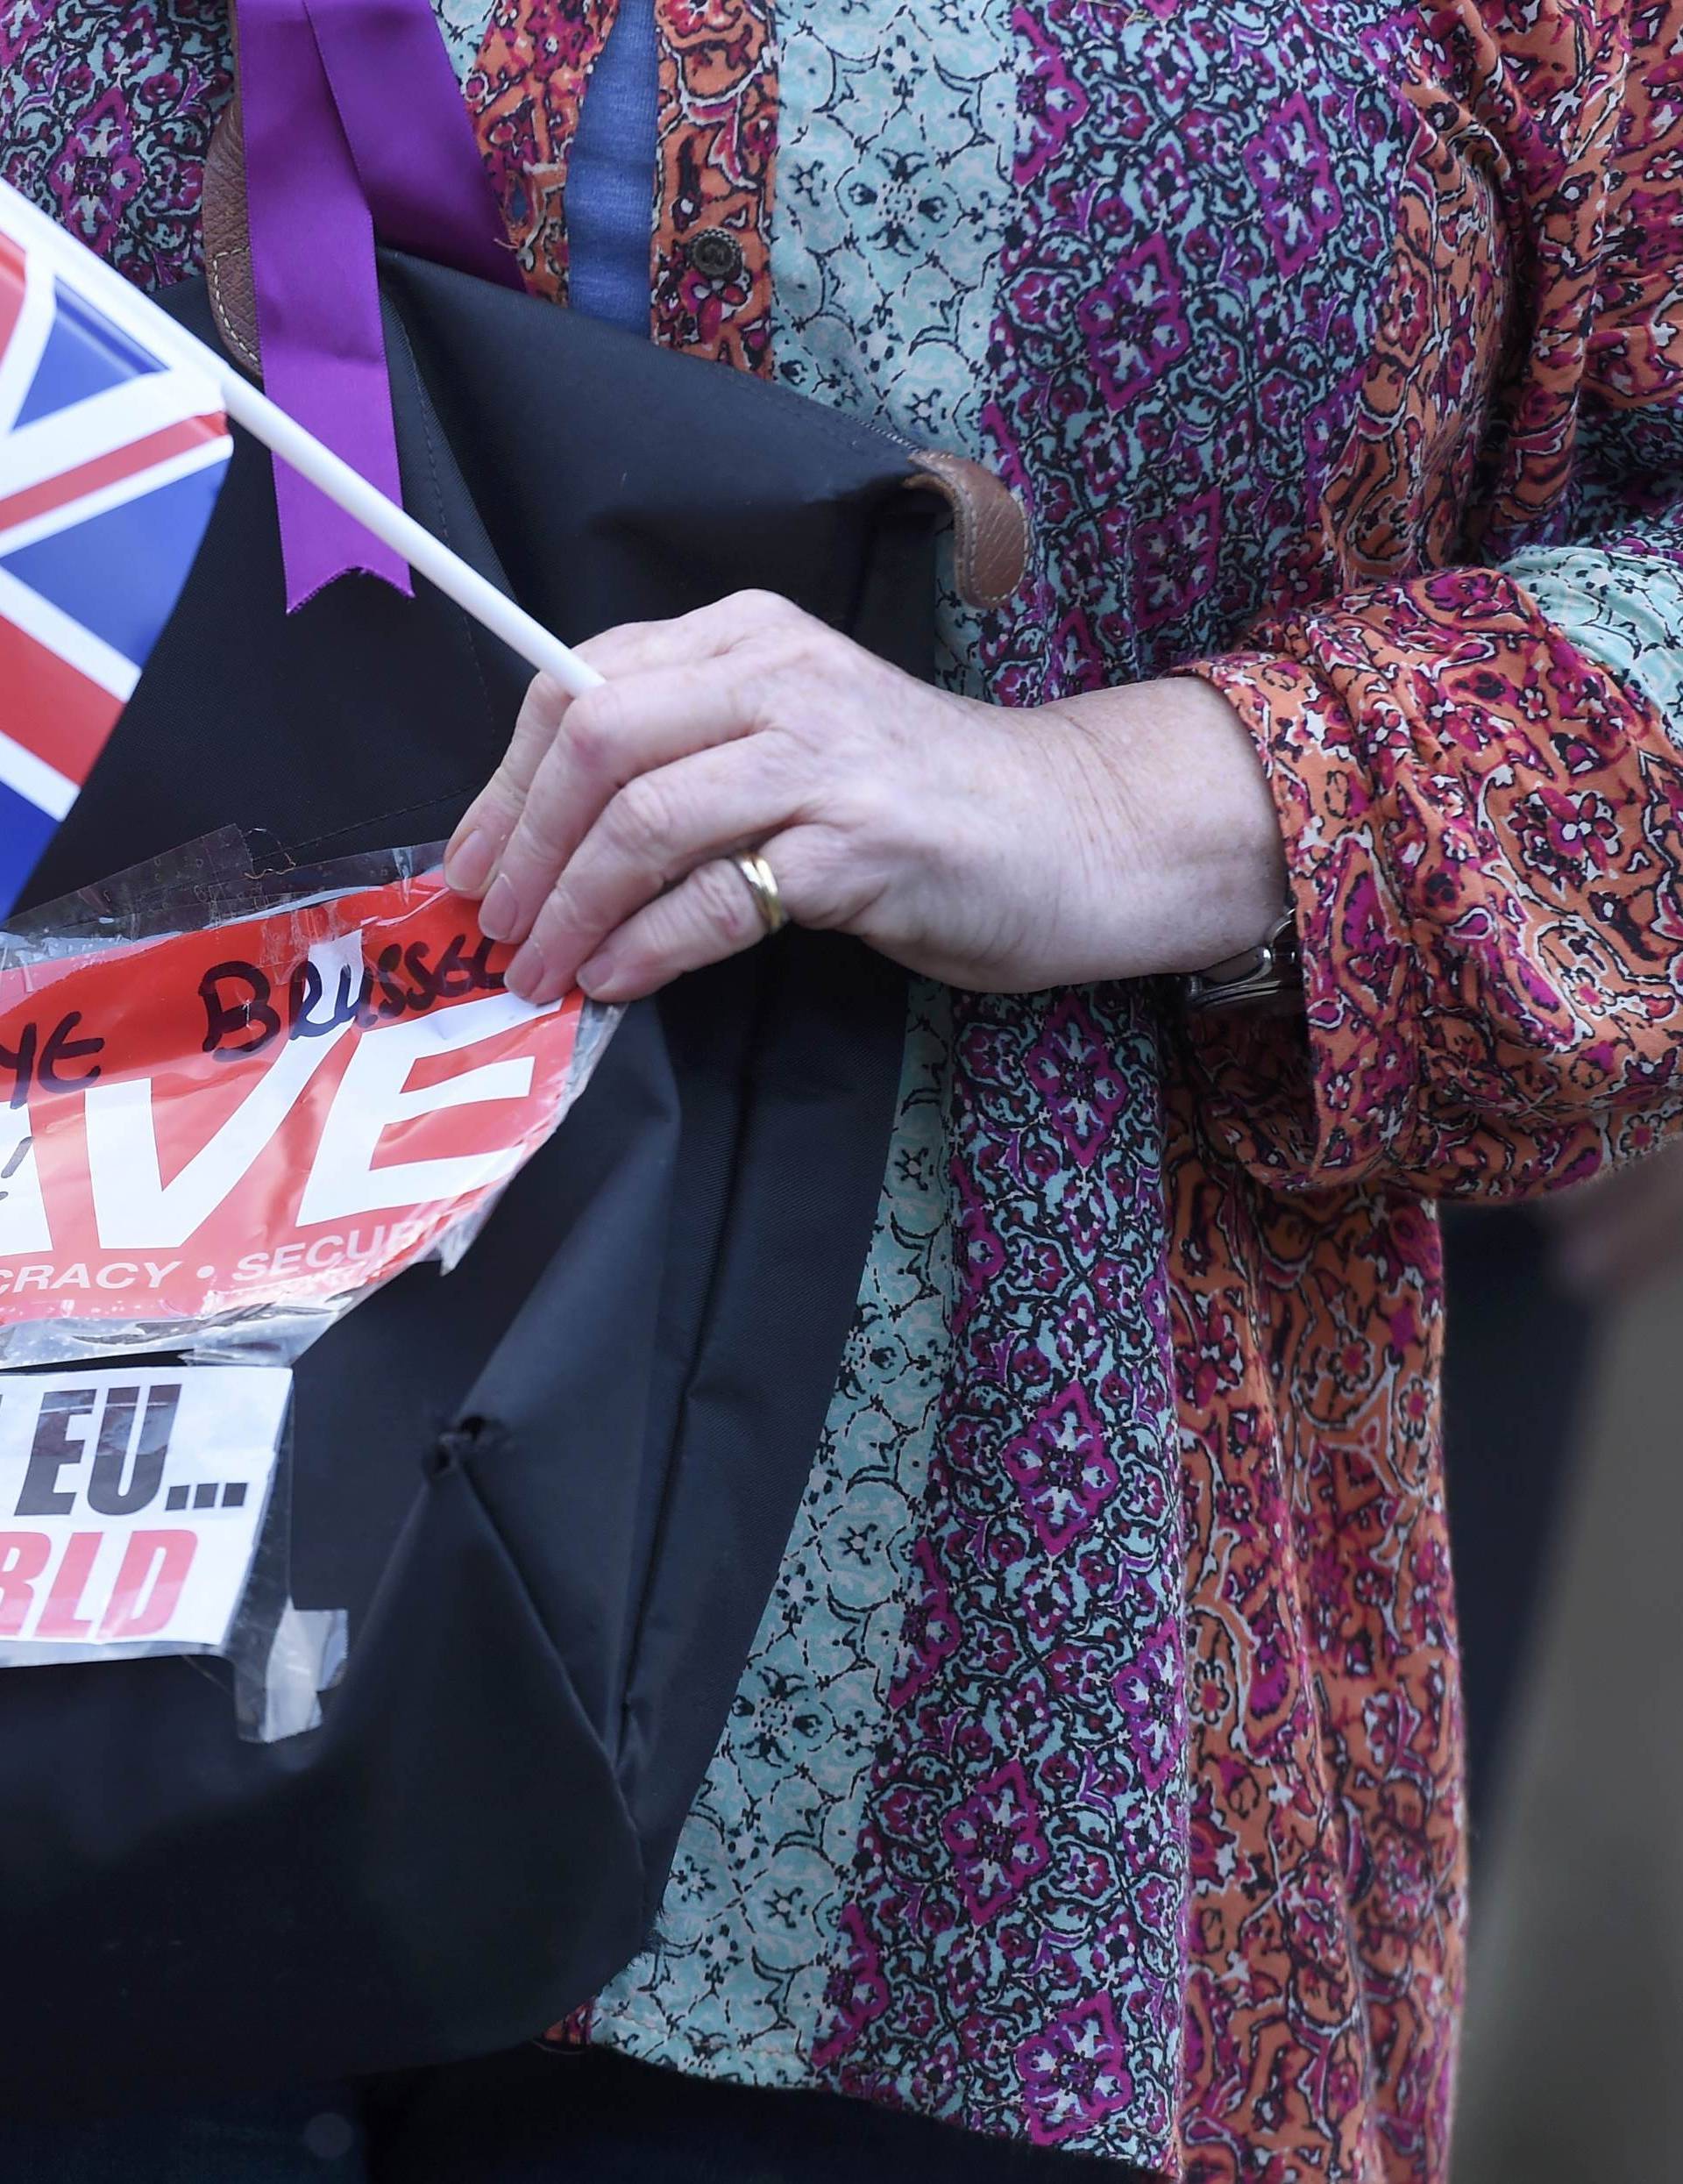 A vote leave supporter holds a poster in Westminster, London